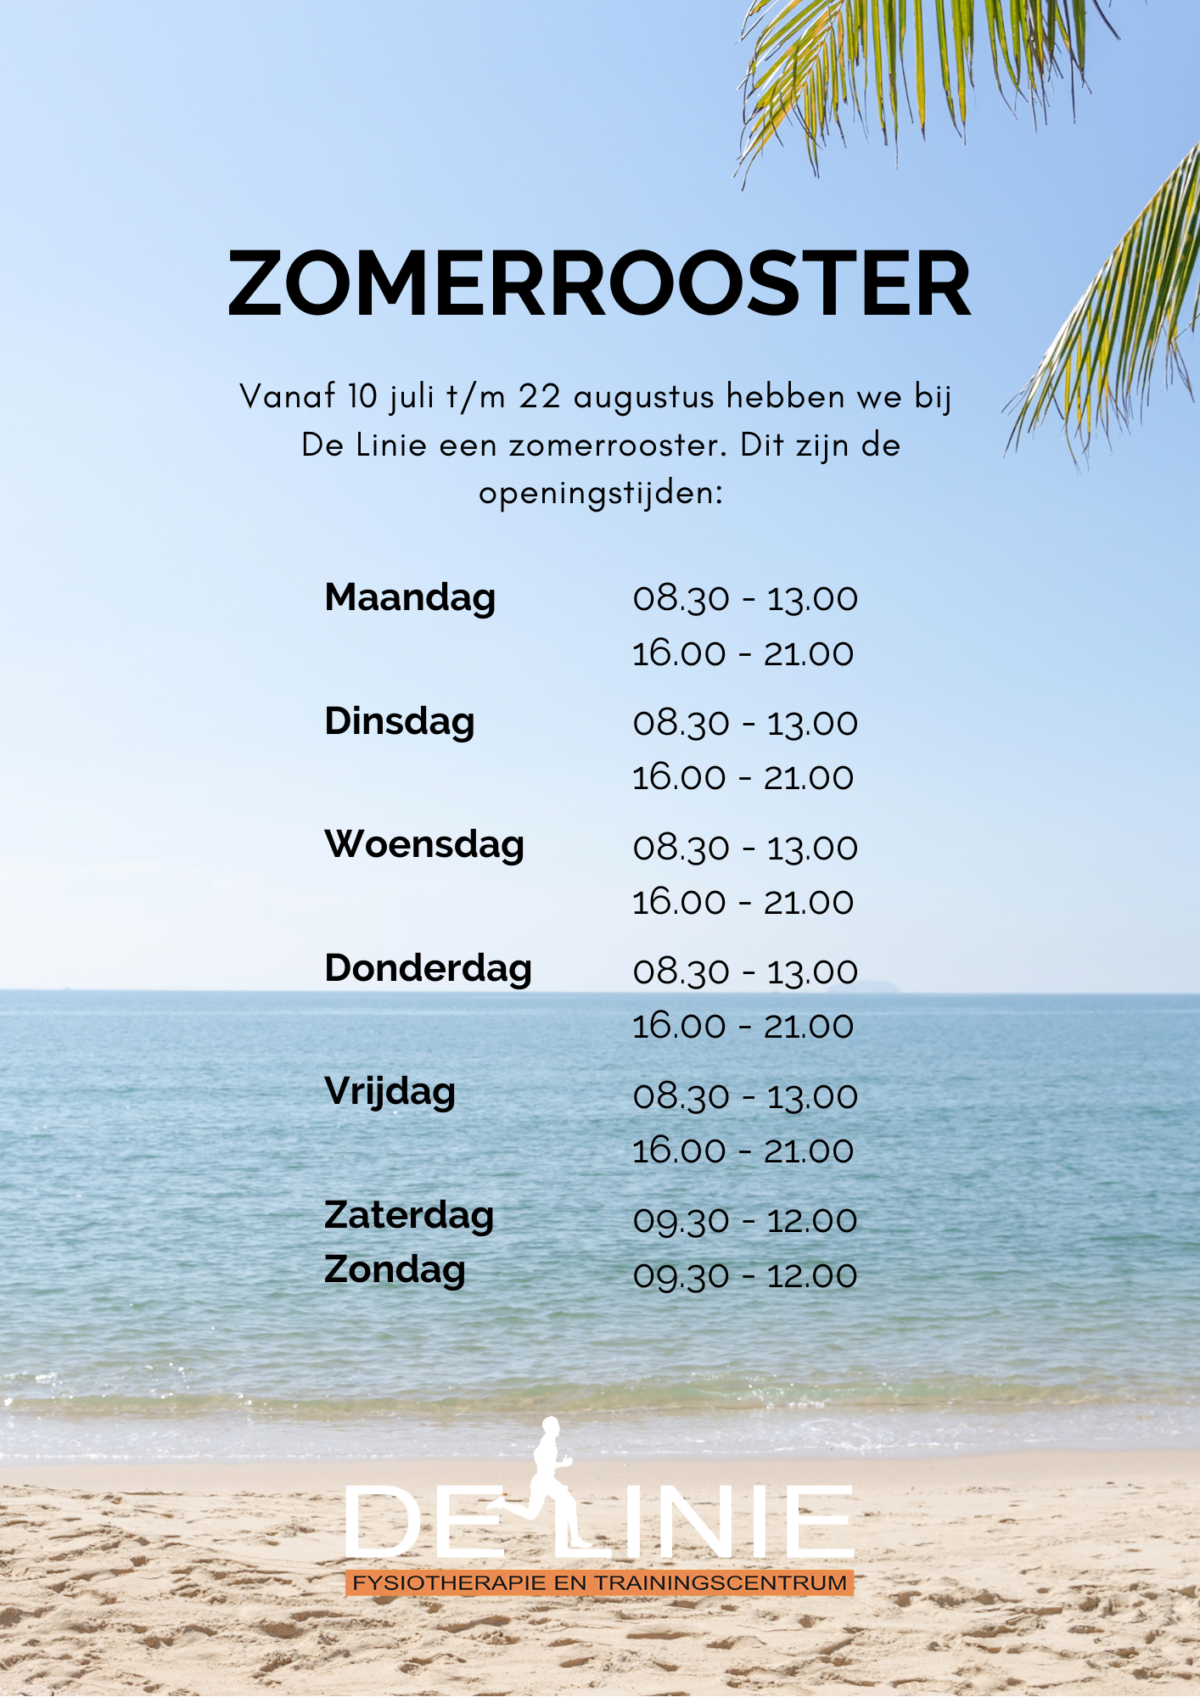 Zomerrooster